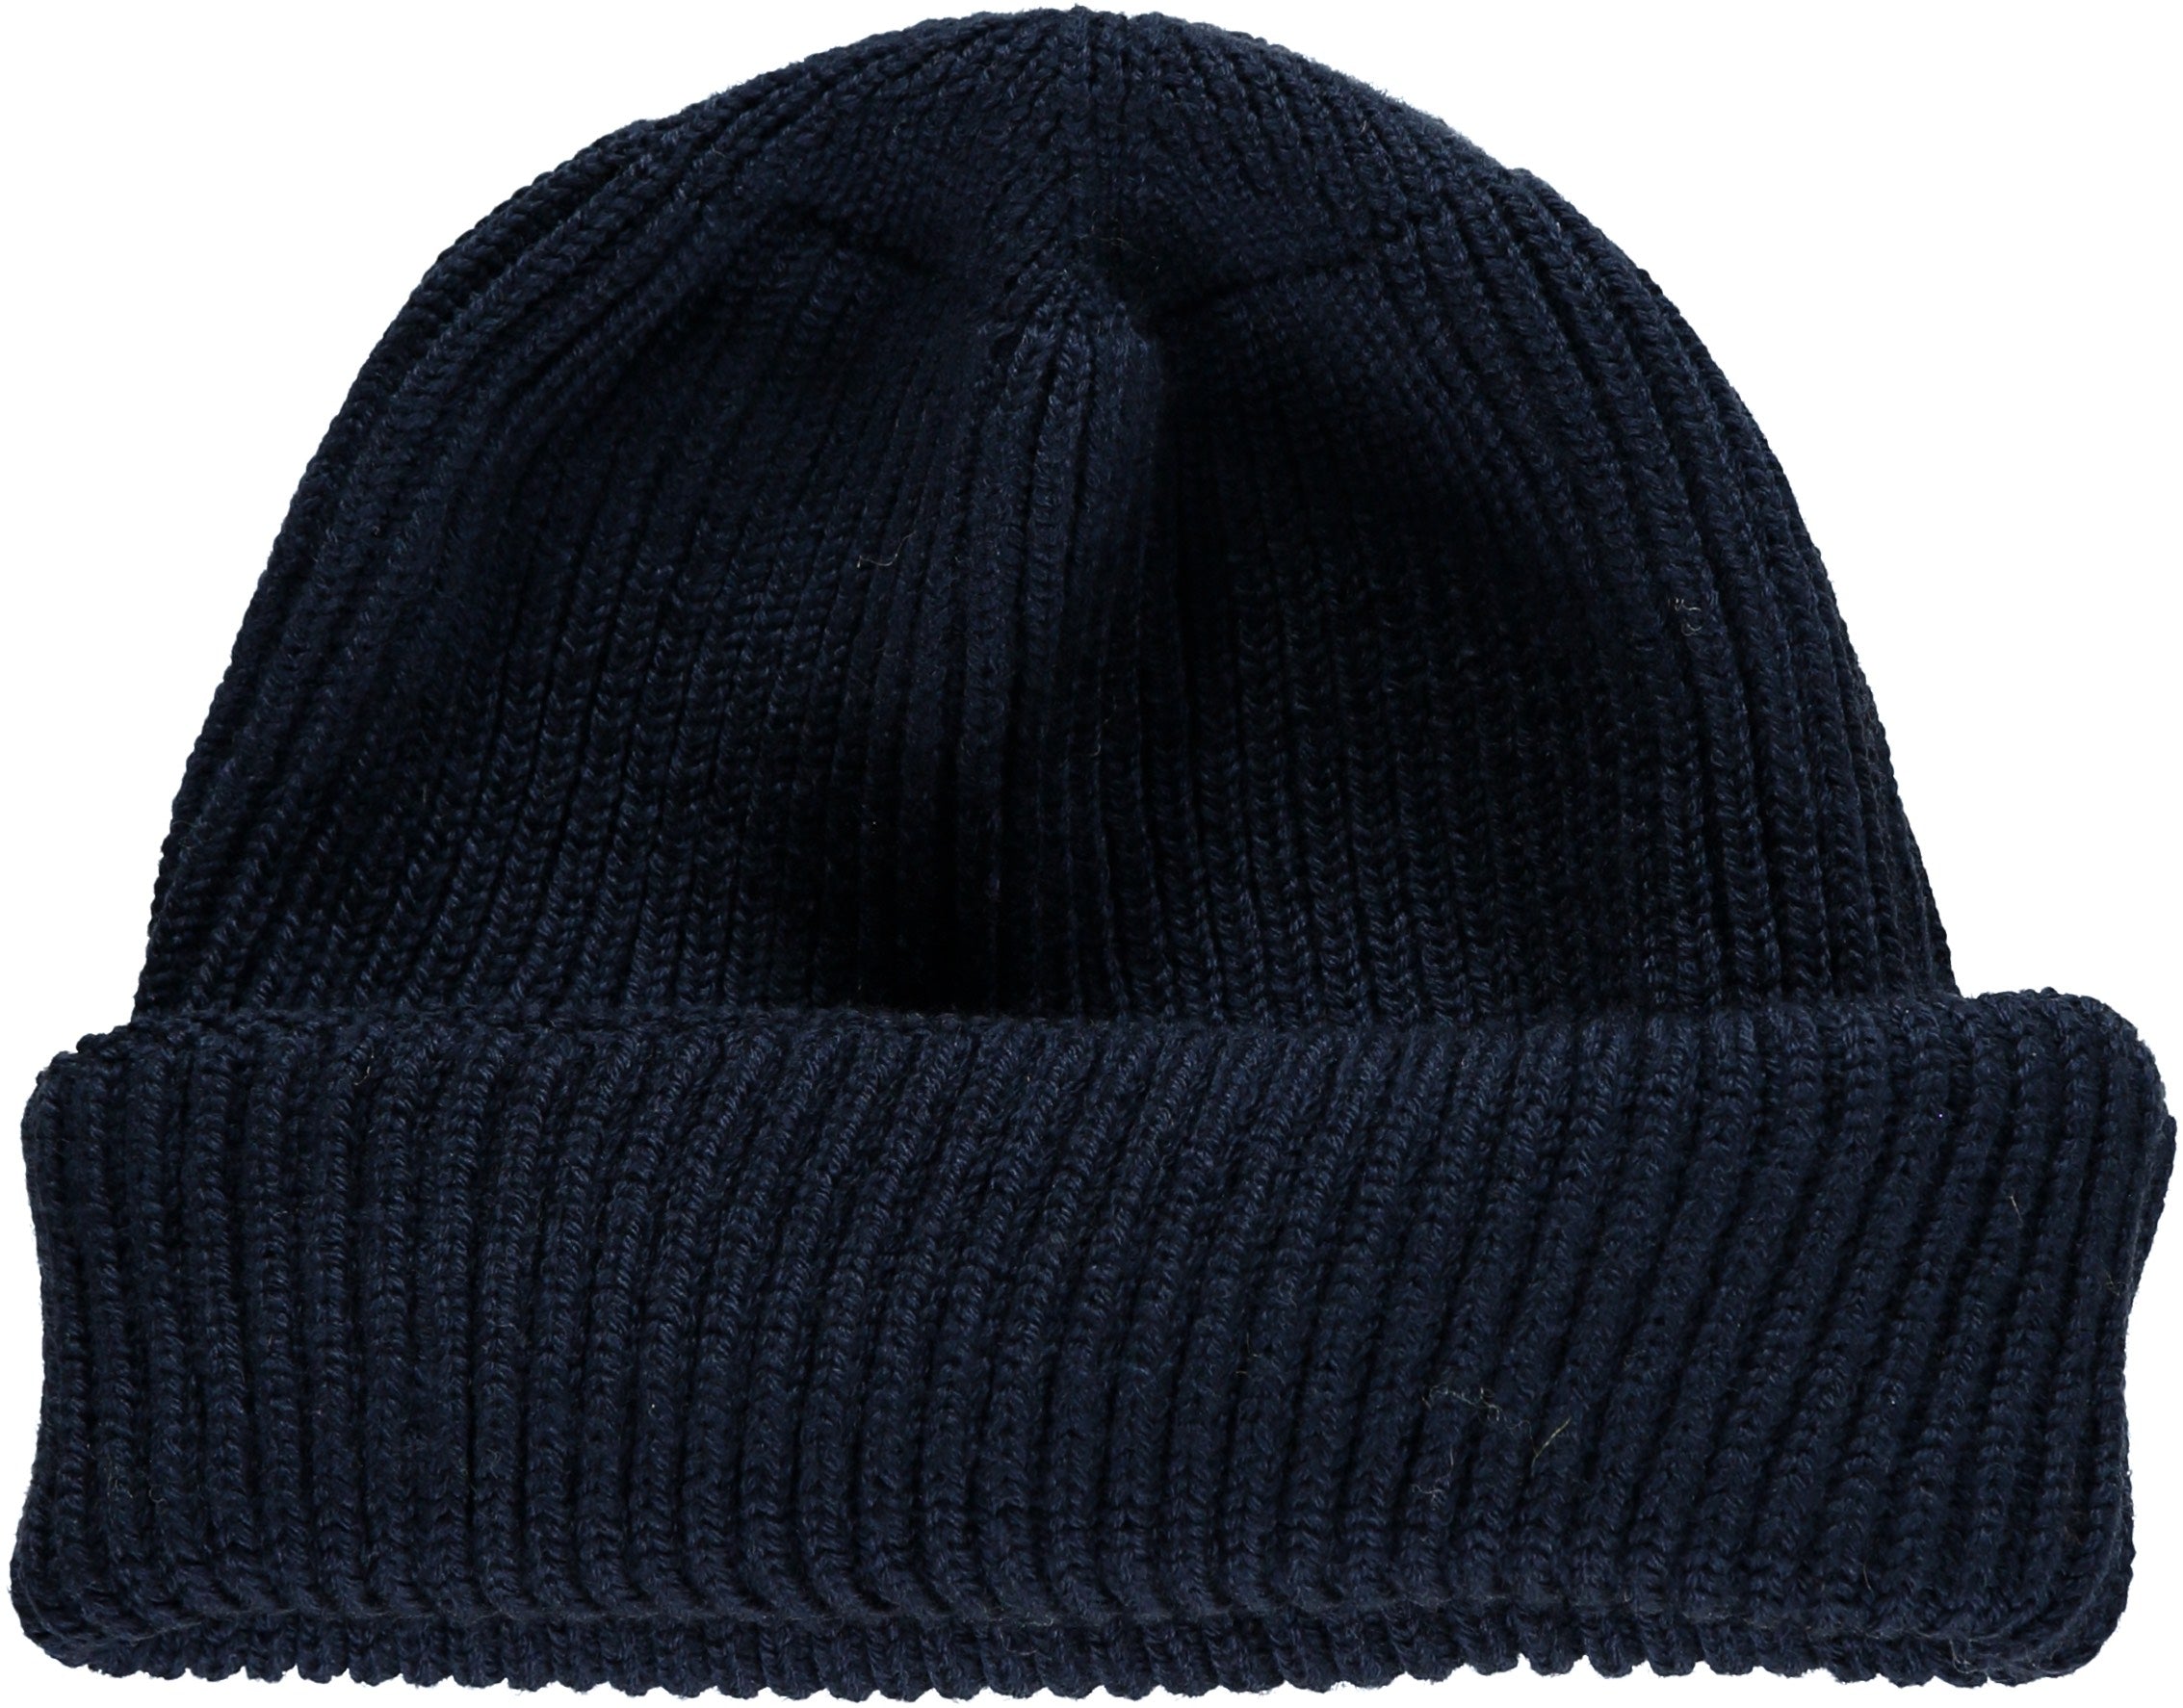 Carrier Company Wool Hat in Navy